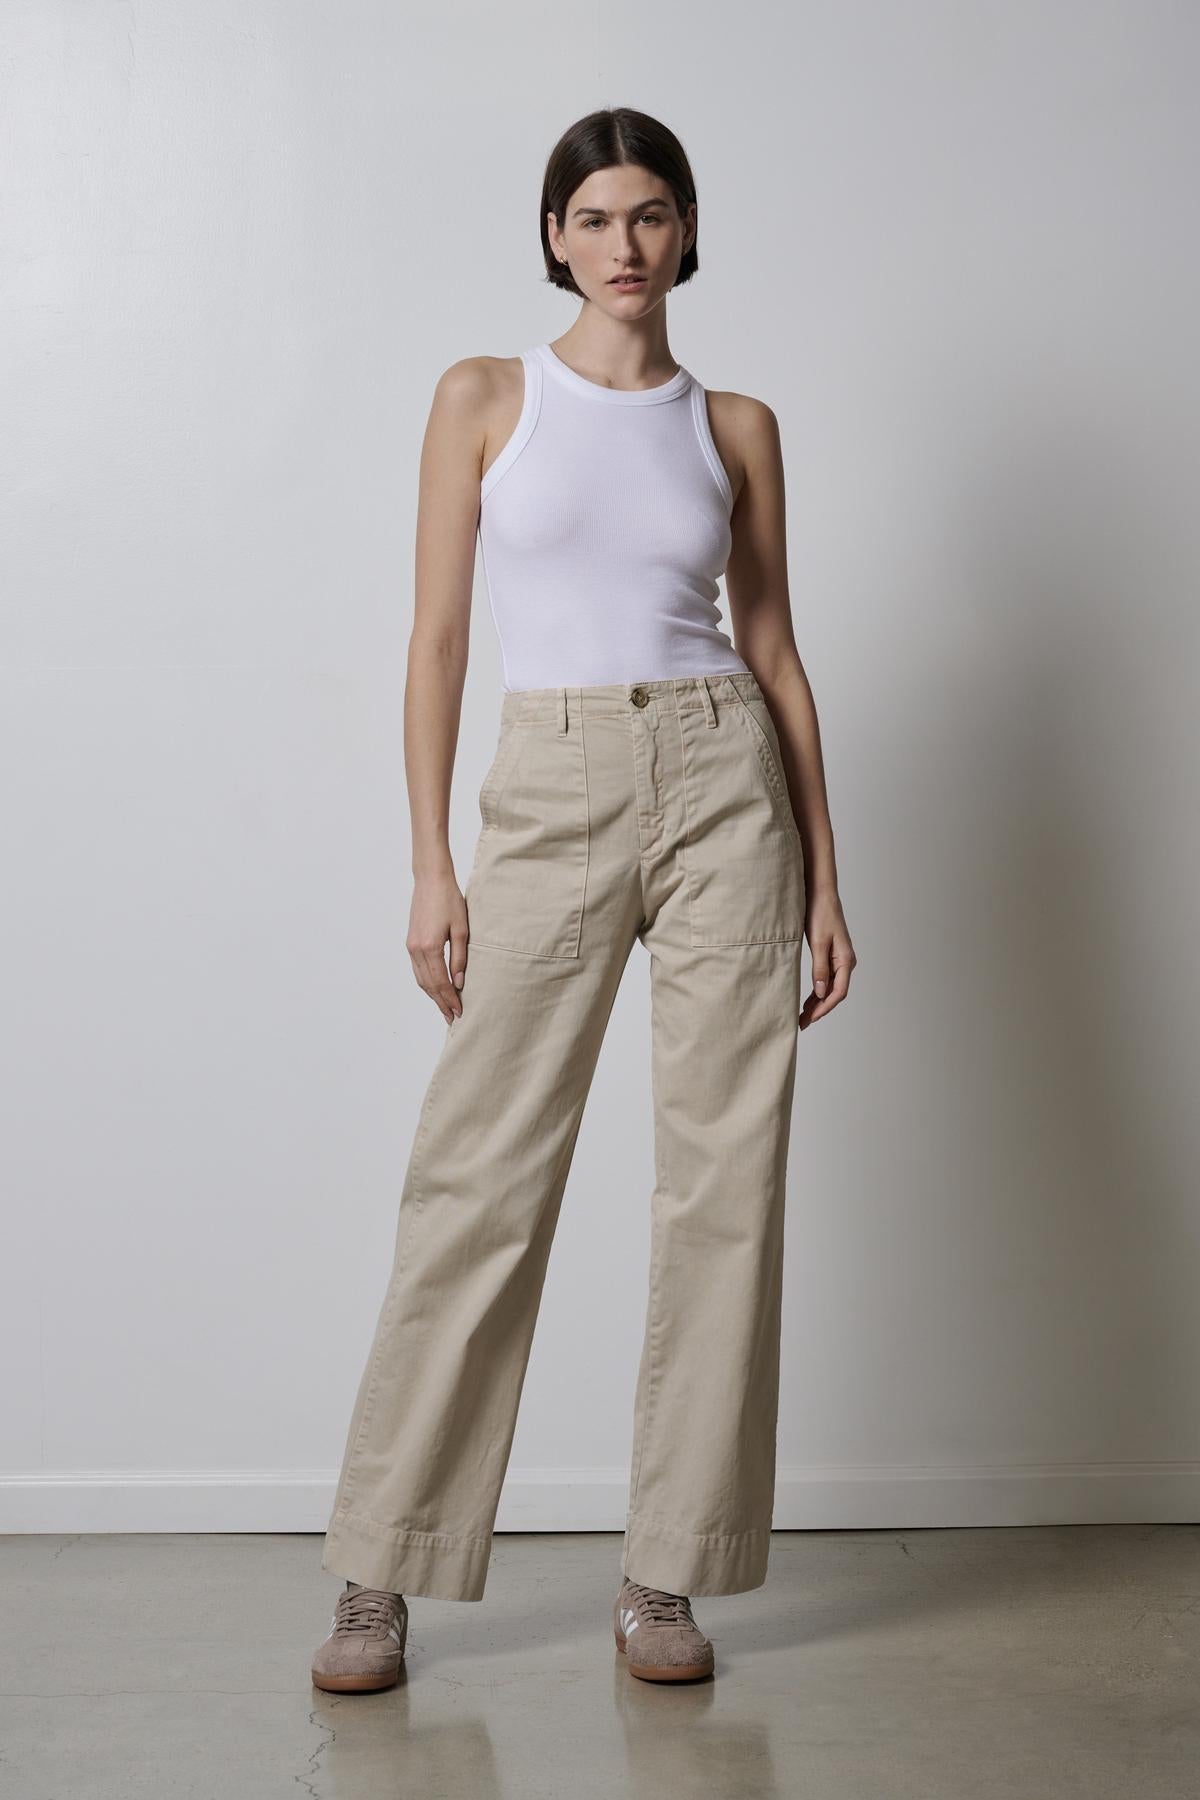 The model is wearing a white tank top and Velvet by Jenny Graham's VENTURA PANT.-26827818401985